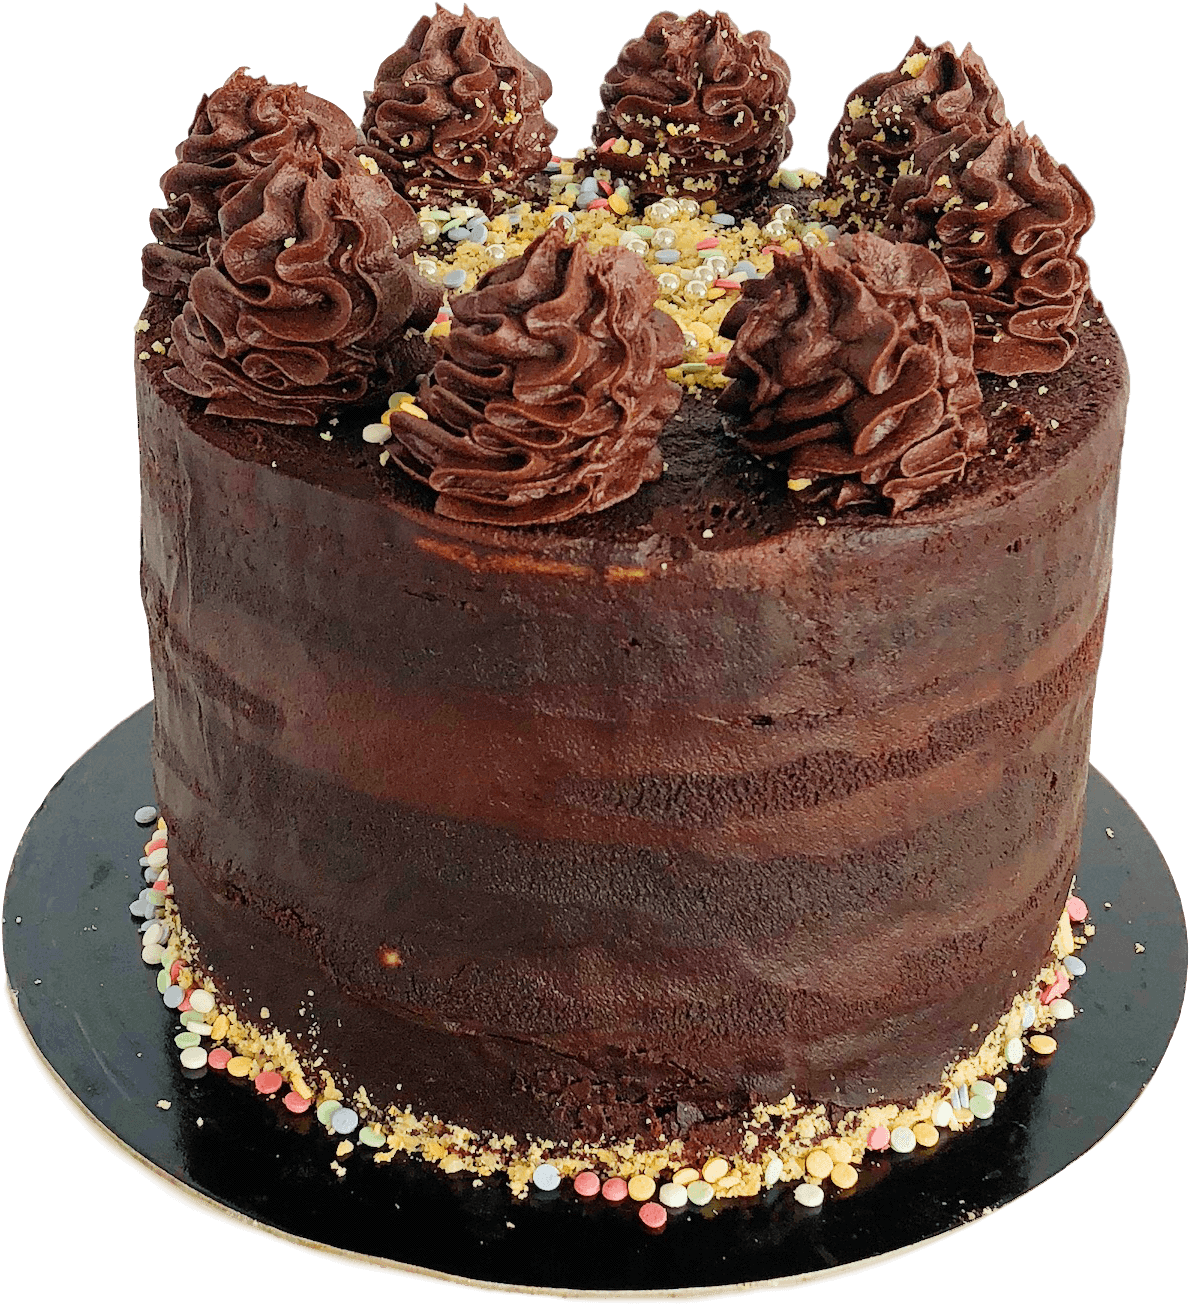 A Chocolate Cake With Frosting On Top